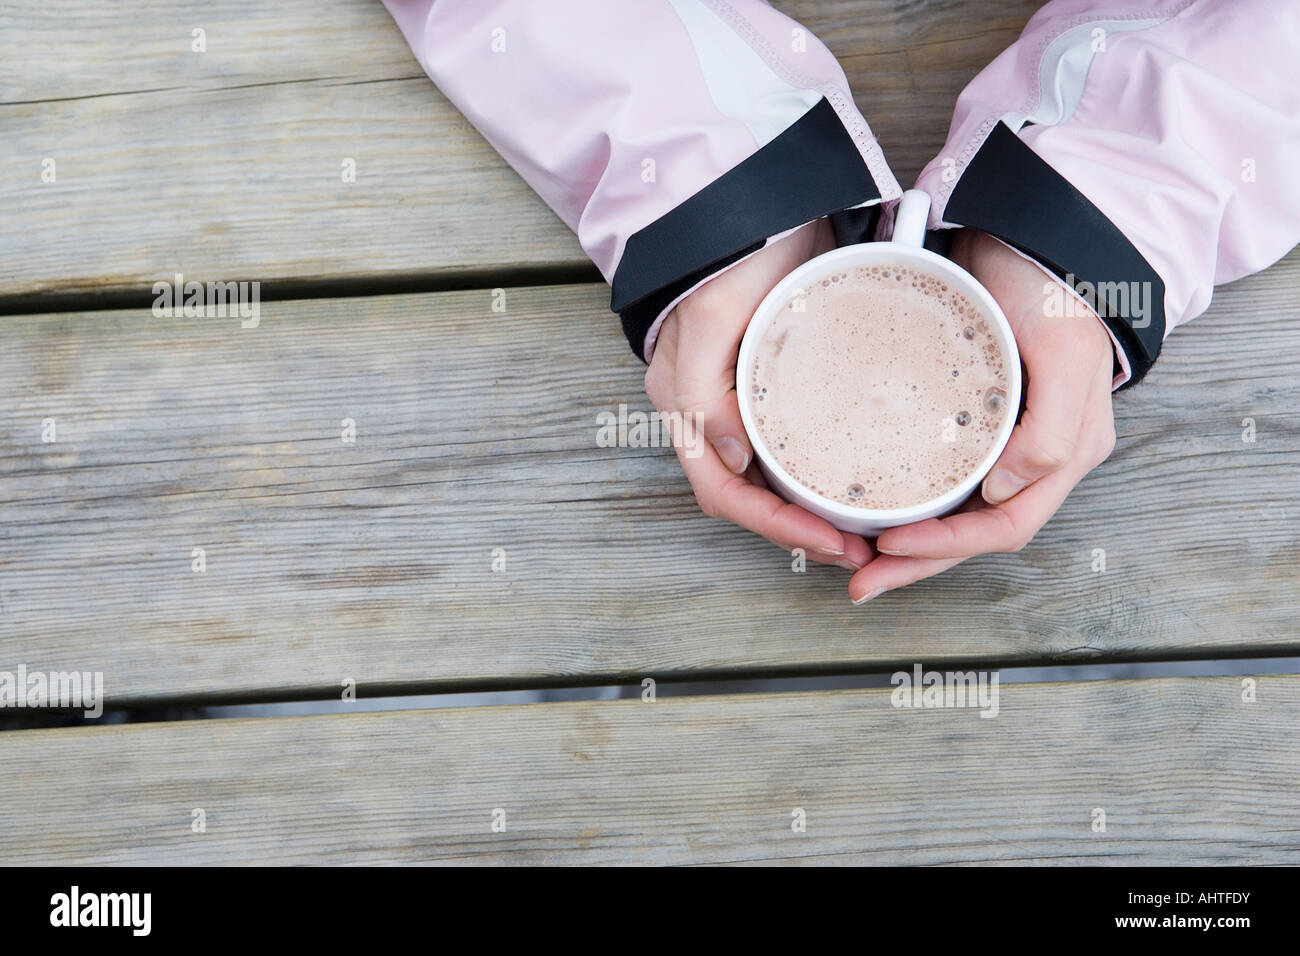 Young woman's hands holding tasse de chocolat chaud, close-up, high angle view Banque D'Images